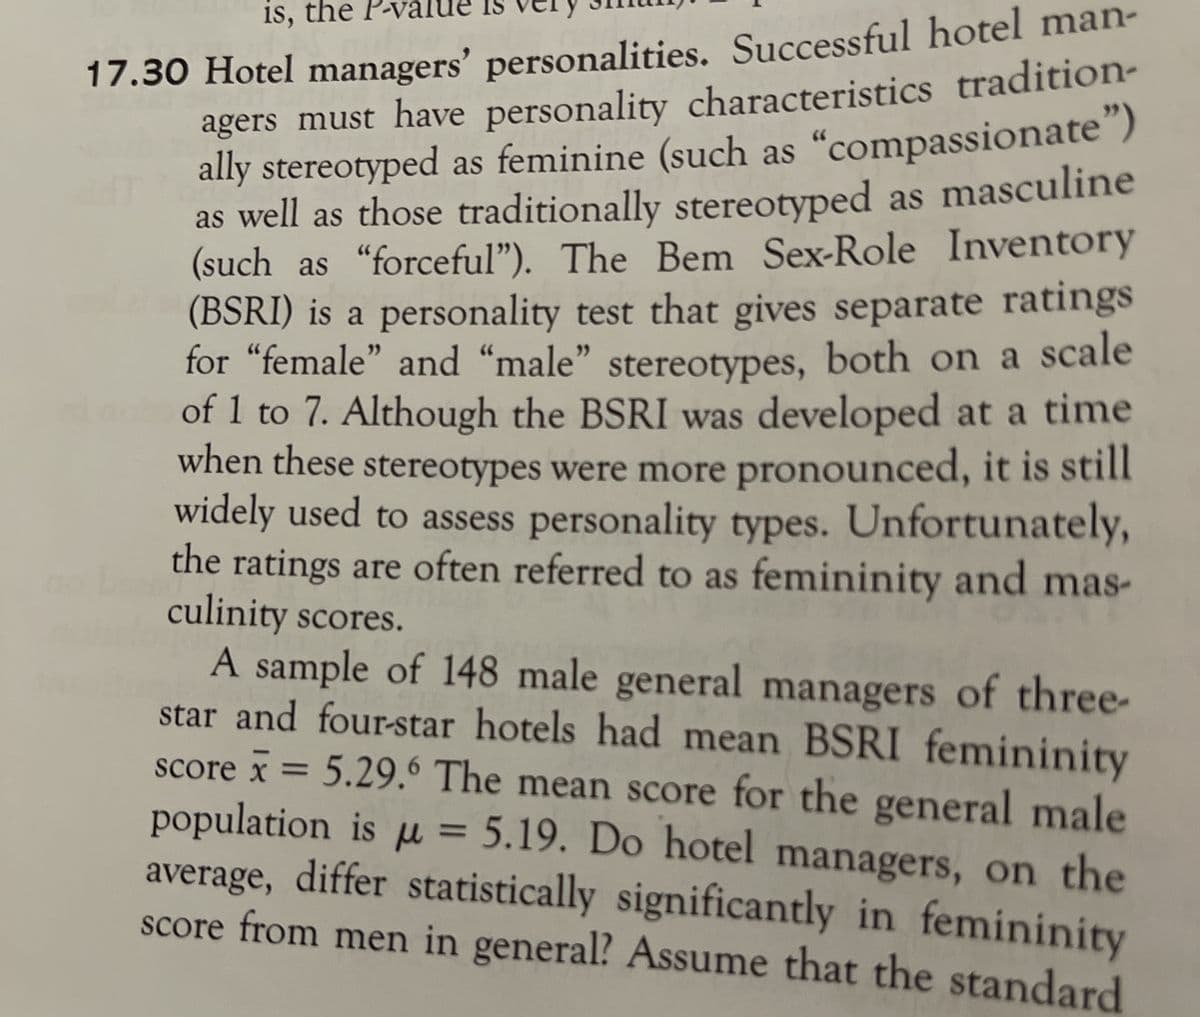 17.30 Hotel managers' personalities. Successful hotel man-
agers must have personality characteristics tradition-
ally stereotyped as feminine (such as "compassionate")
as well as those traditionally stereotyped as masculine
(such as "forceful"). The Bem Sex-Role Inventory
(BSRI) is a personality test that gives separate ratings
for “female" and "male" stereotypes, both on a scale
of 1 to 7. Although the BSRI was developed at a time
when these stereotypes were more pronounced, it is still
widely used to assess personality types. Unfortunately,
the ratings are often referred to as femininity and mas-
culinity scores.
A sample of 148 male general managers of three-
star and four-star hotels had mean BSRI femininity
score x = 5.29.6 The mean score for the general male
population is u = 5.19. Do hotel managers, on the
average, differ statistically significantly in femininity
score from men in general? Assume that the standard
is, the
X%3D
%3D
